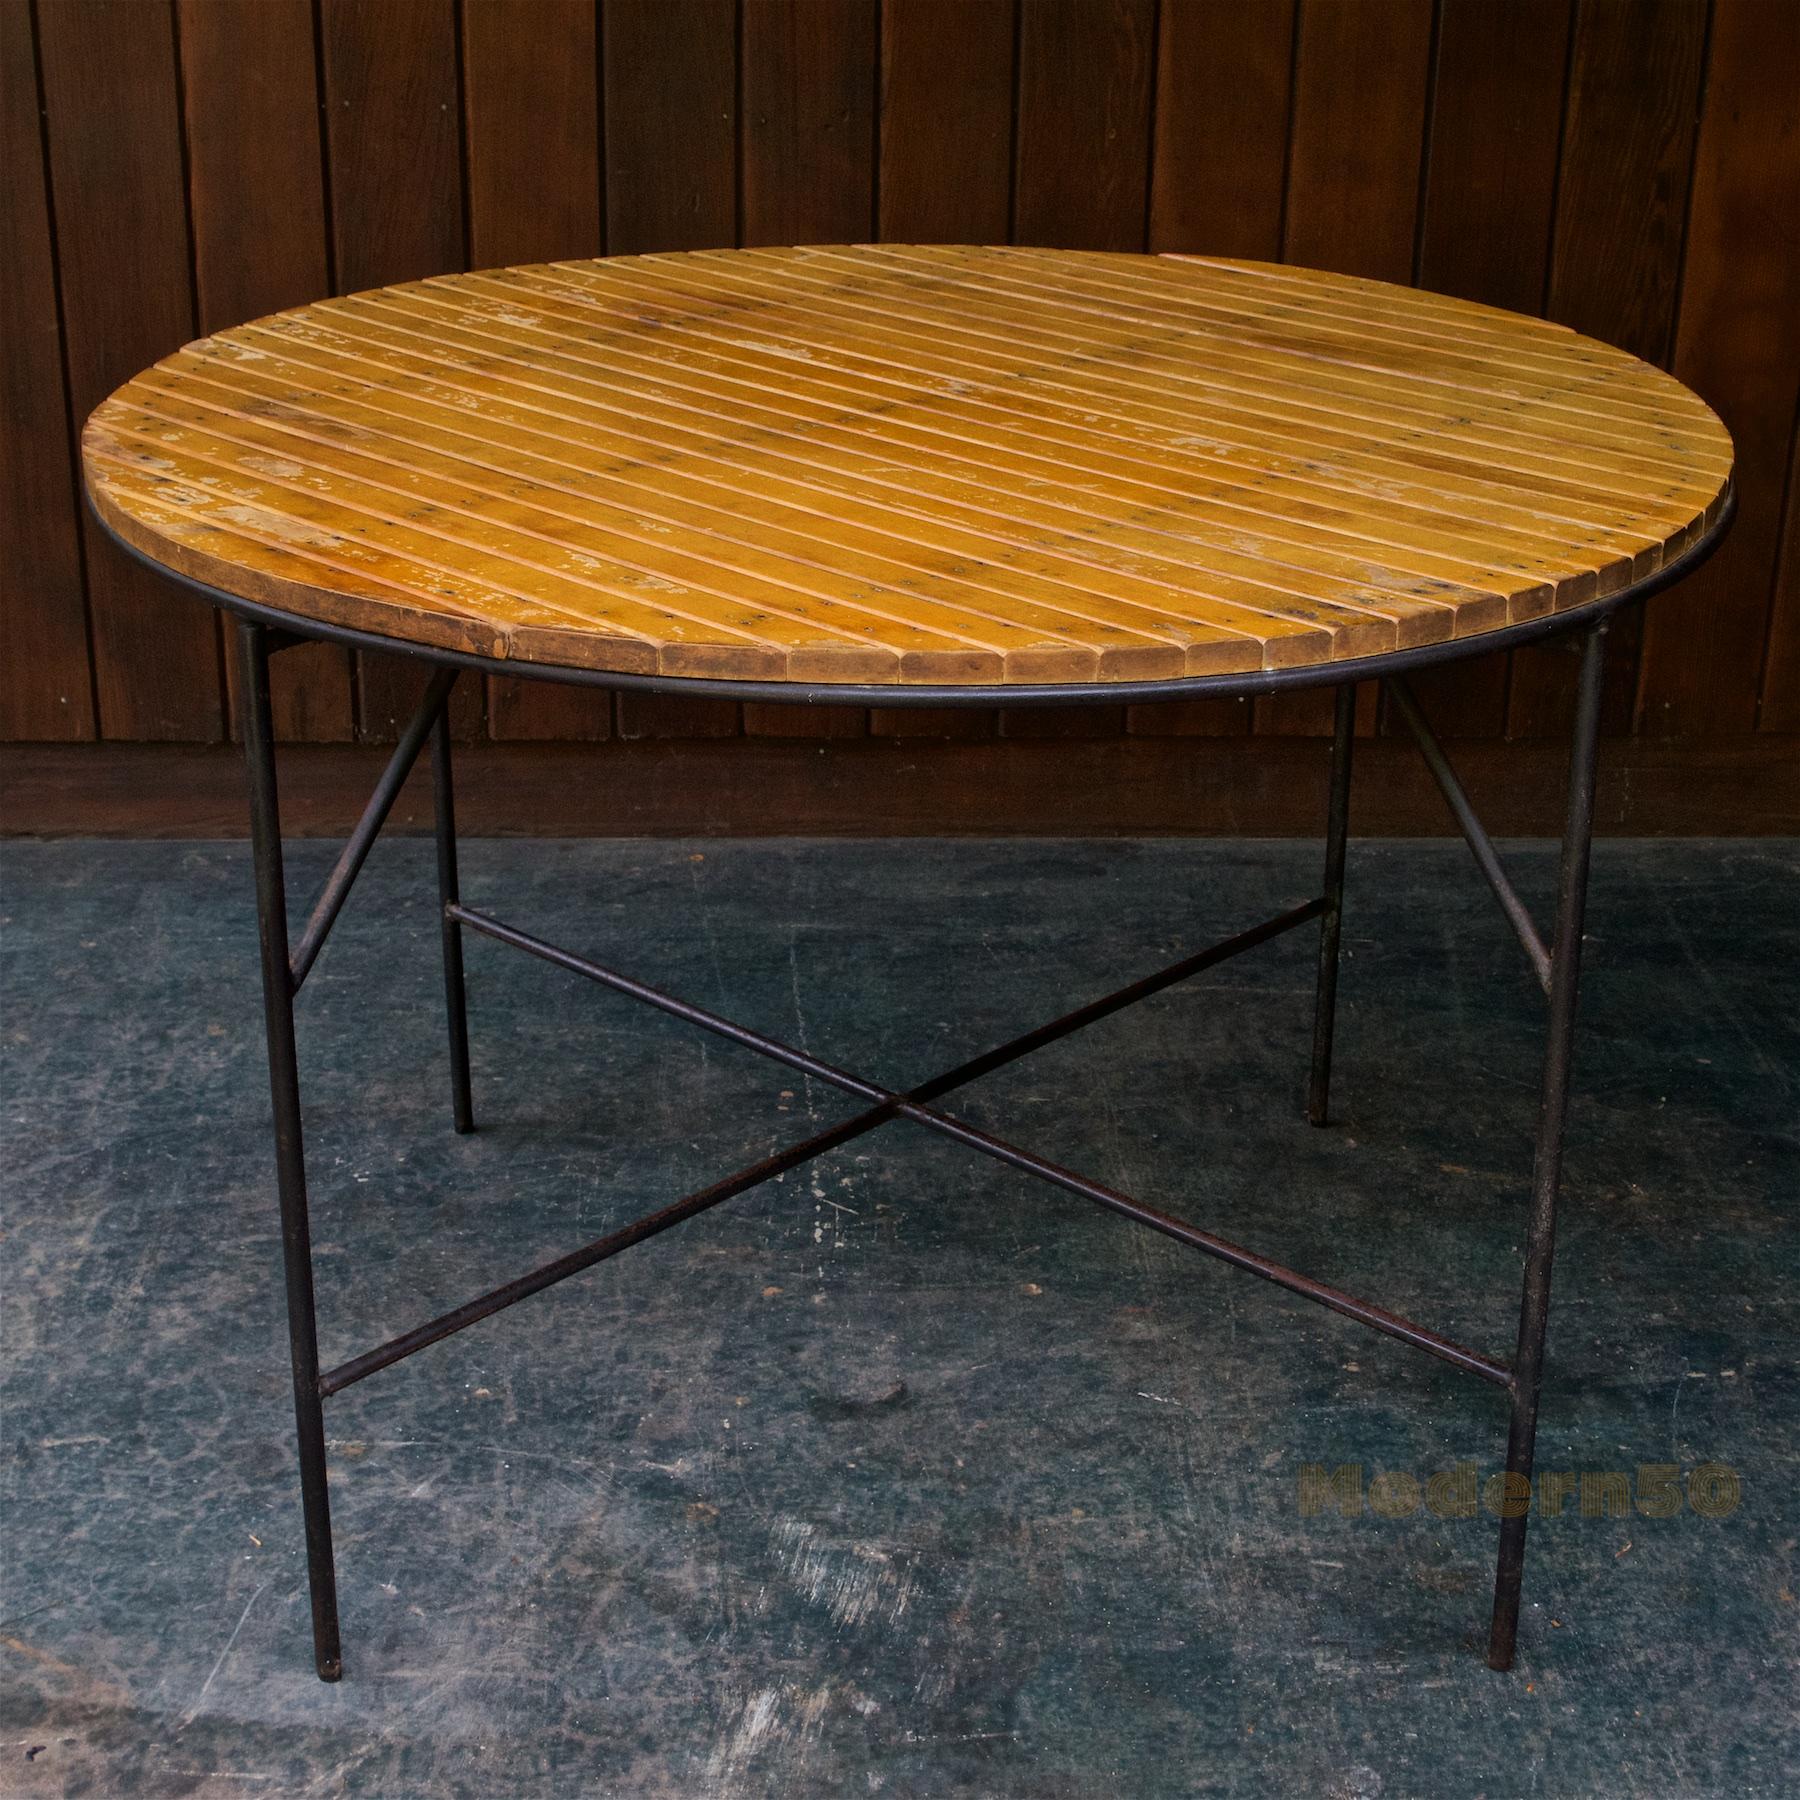 Place your perfect chair set around this patinated authentic 1950s California poolside table.